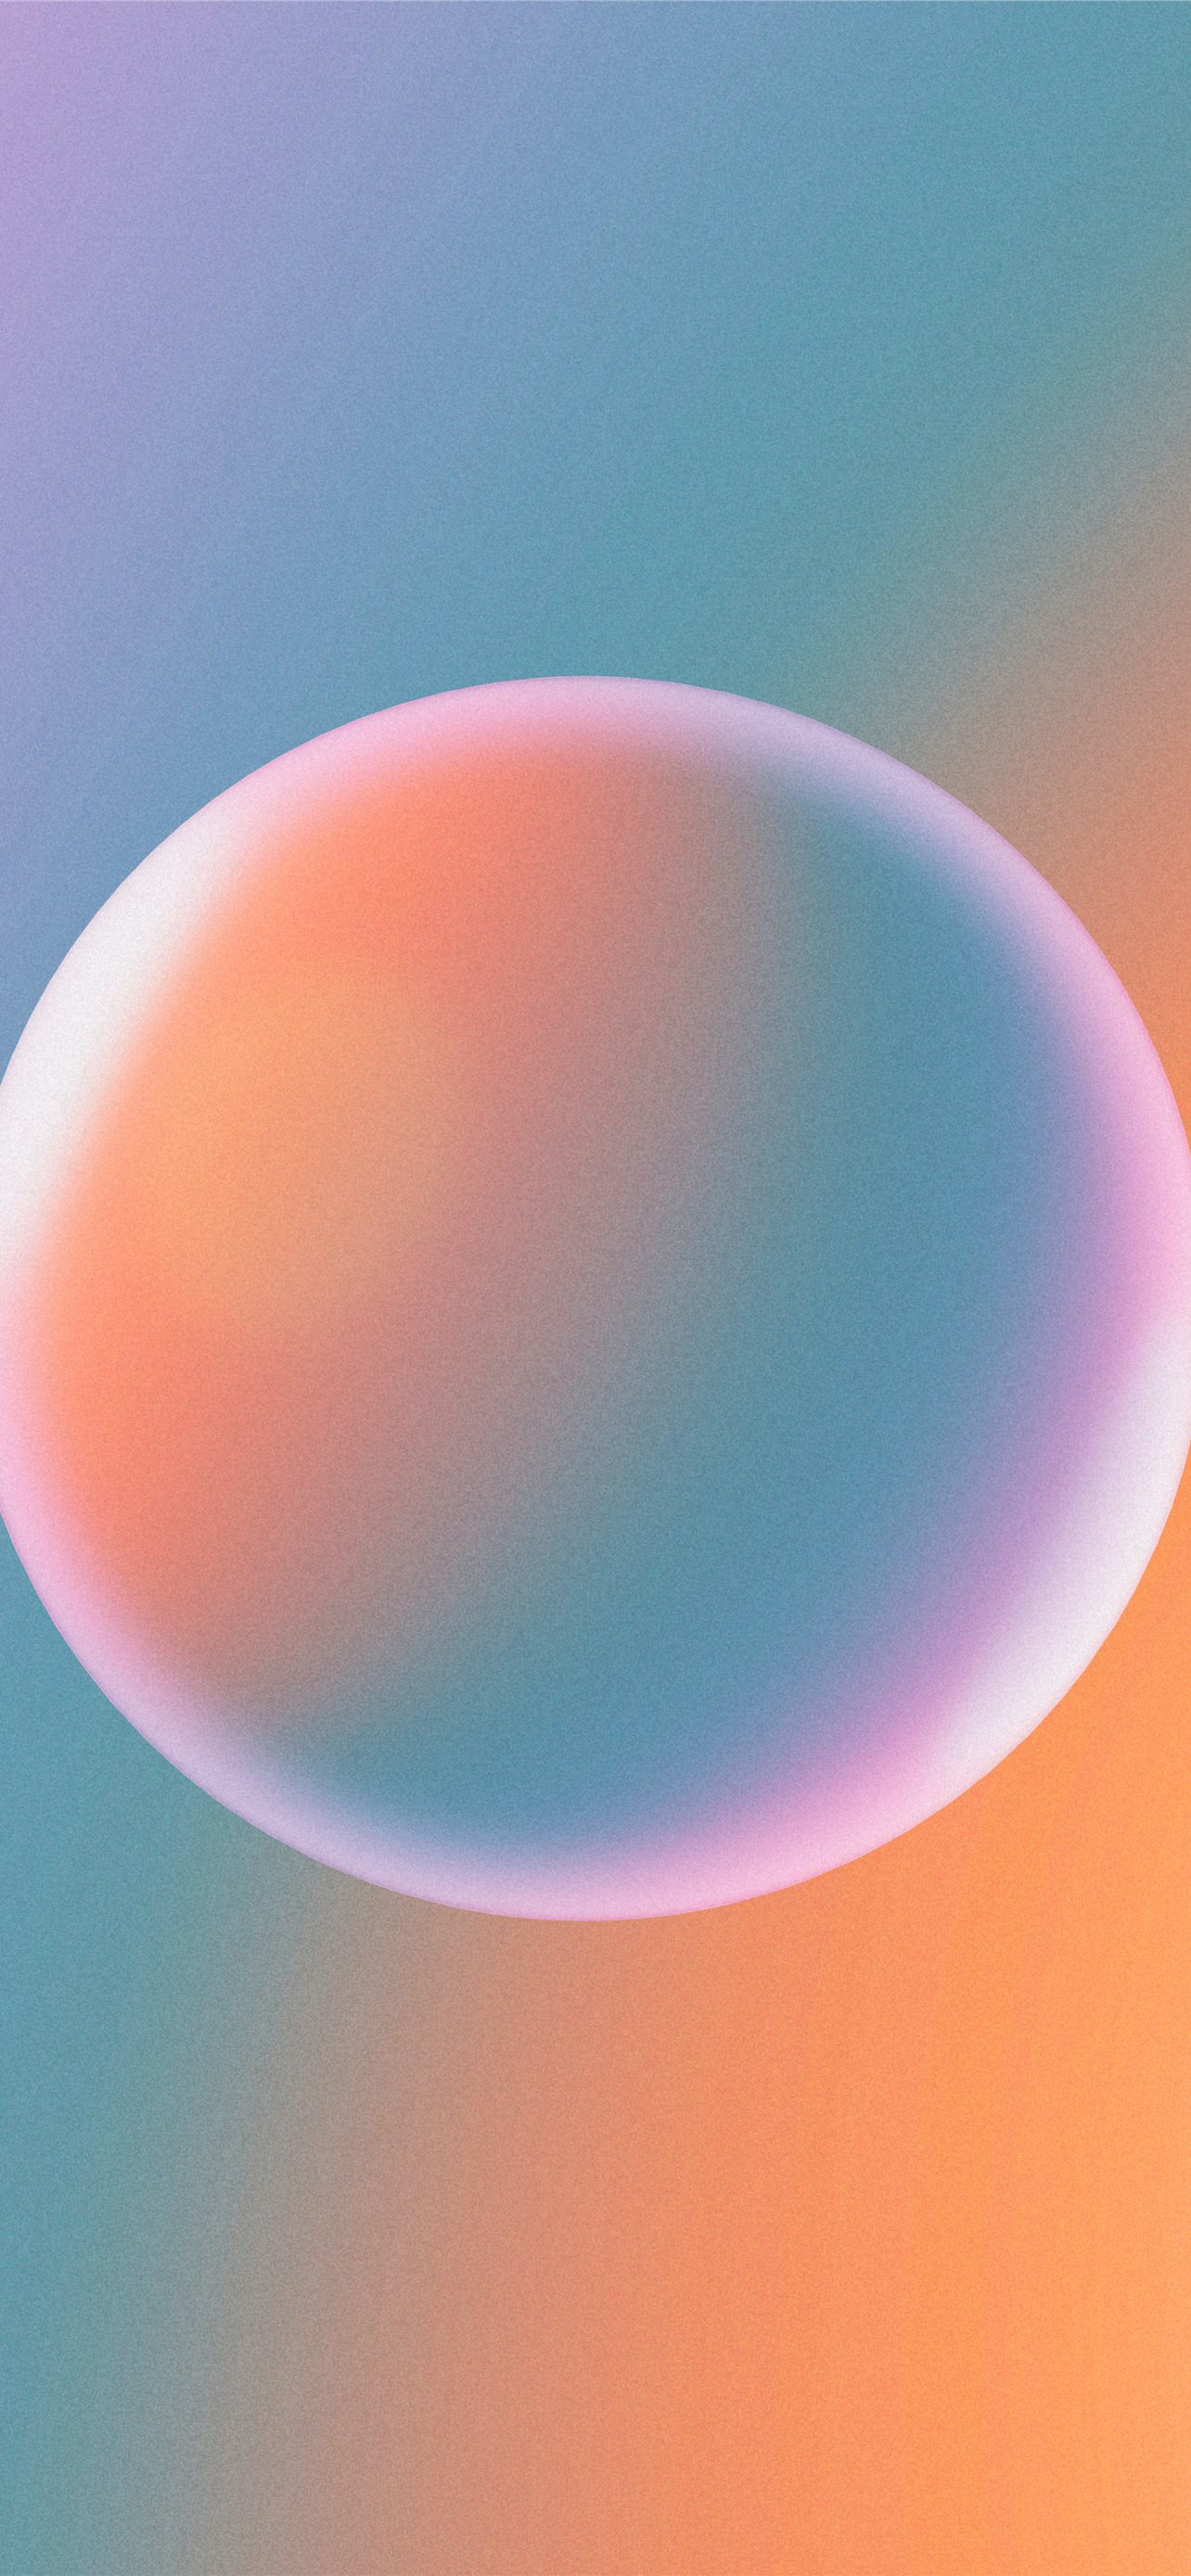 Colorful Simplicity iPhone wallpaper 